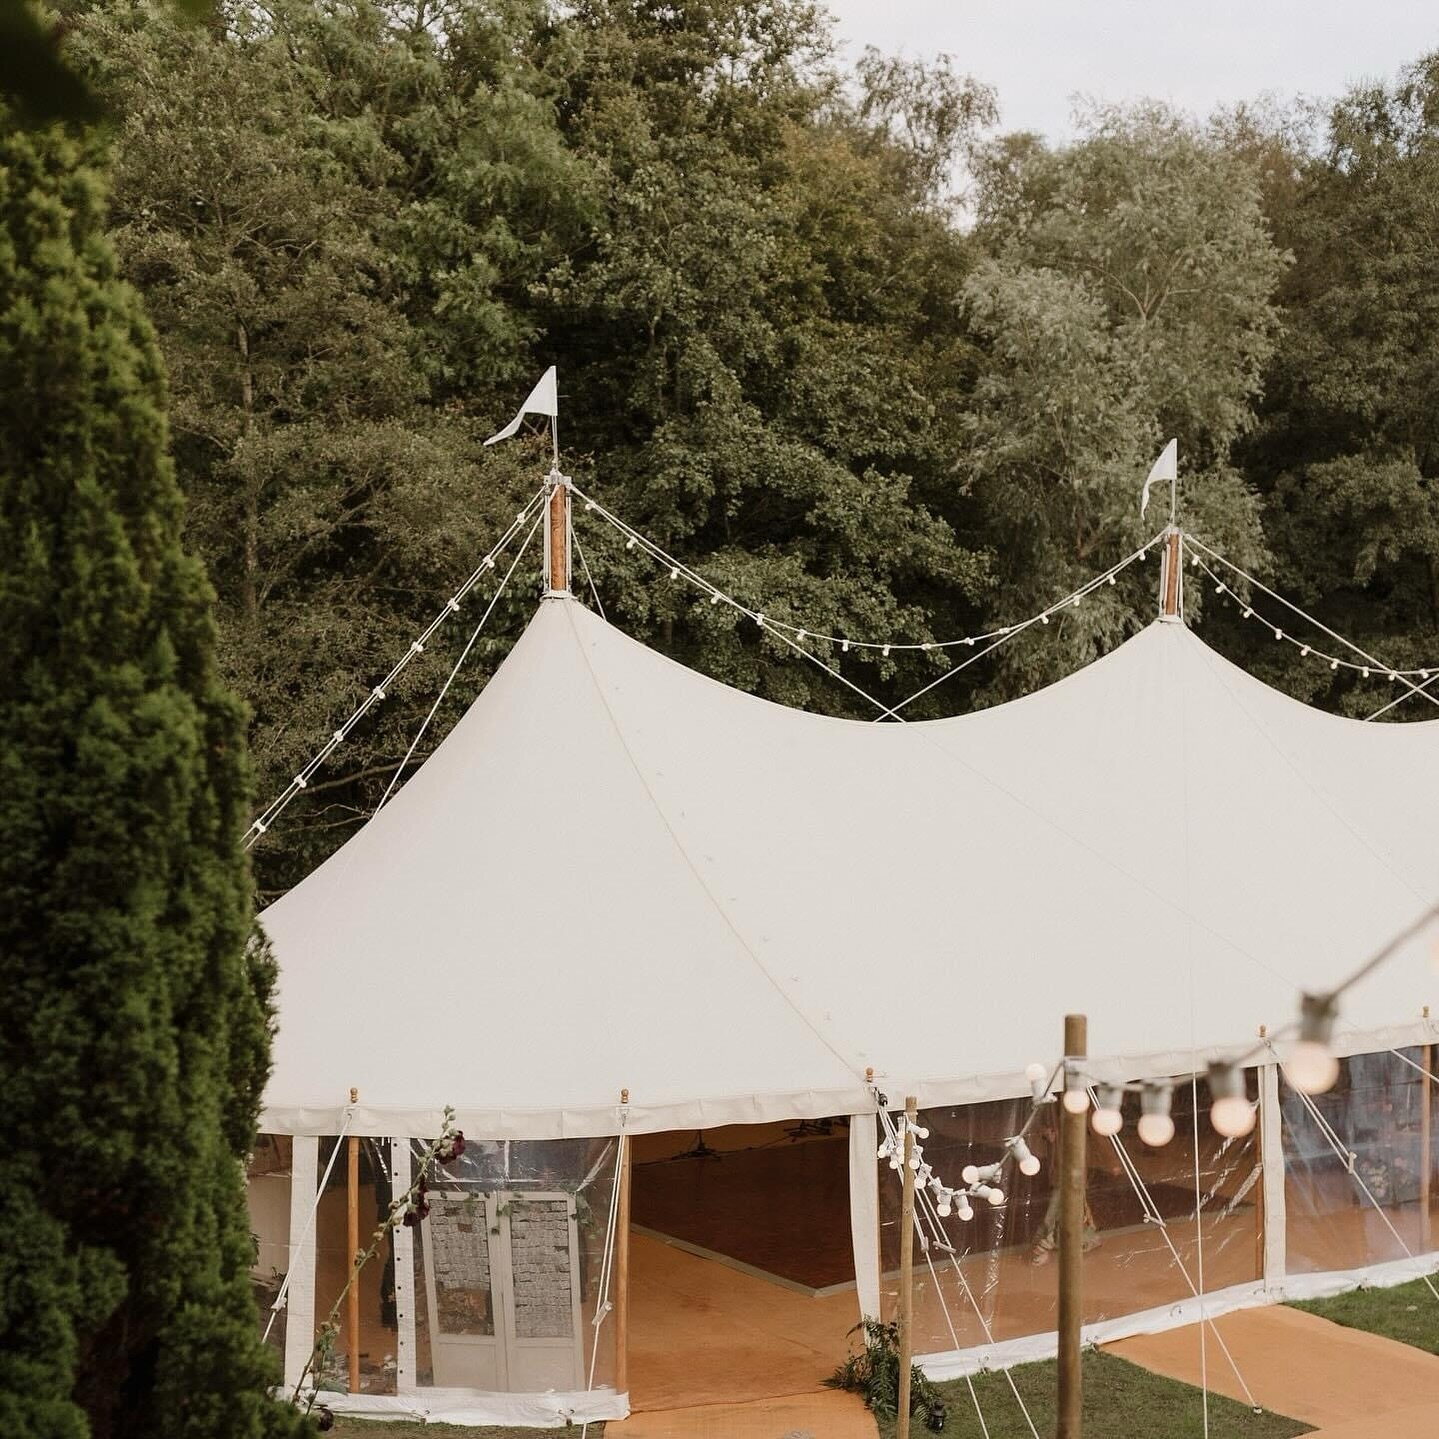 Nestled within natures embrace and not at all looking out of place, our 9m x 23m marquee ready to welcome the wedding party at @heathylea.chatsworth last September 🍃

📸 @freyaraby 

#thecanvastentco #itsawills #marqueehire #weddingmarquee #marqueew